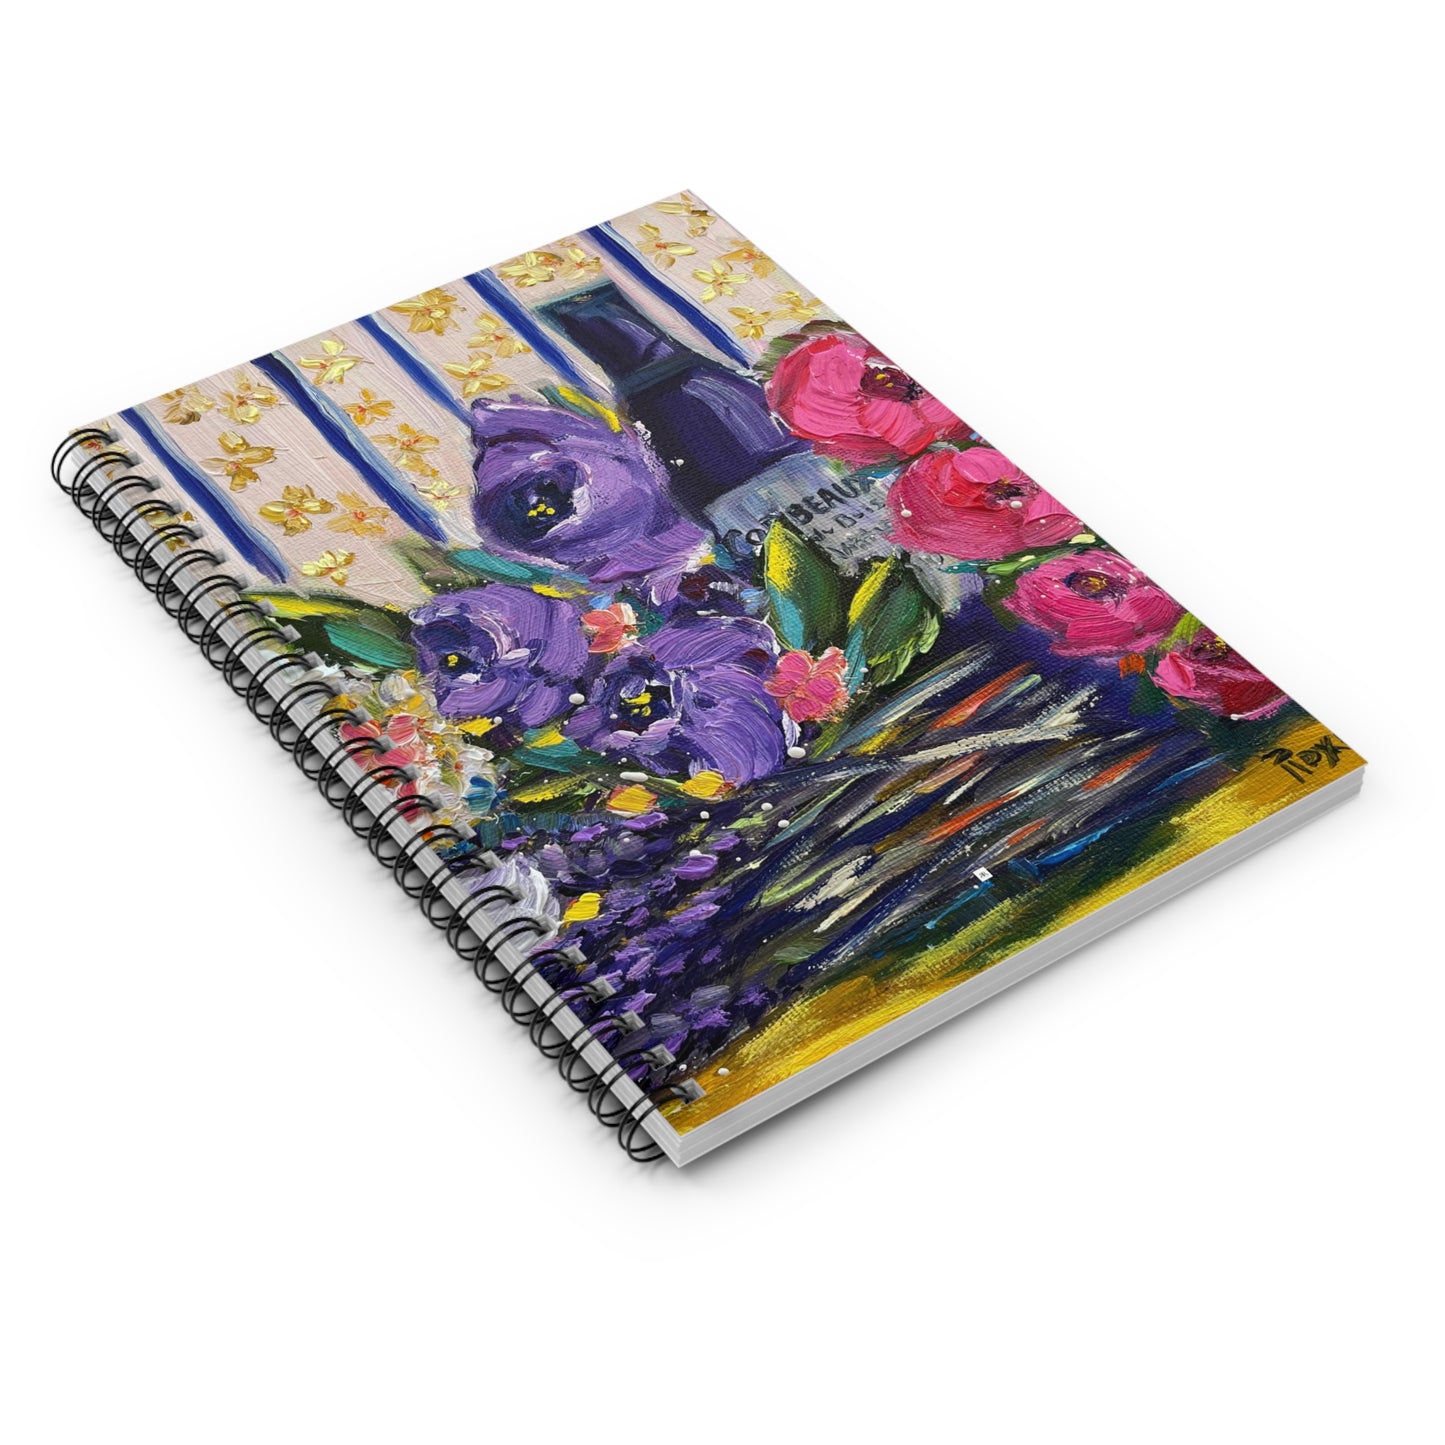 Corbeaux Wine and Lavender- Spiral Notebook